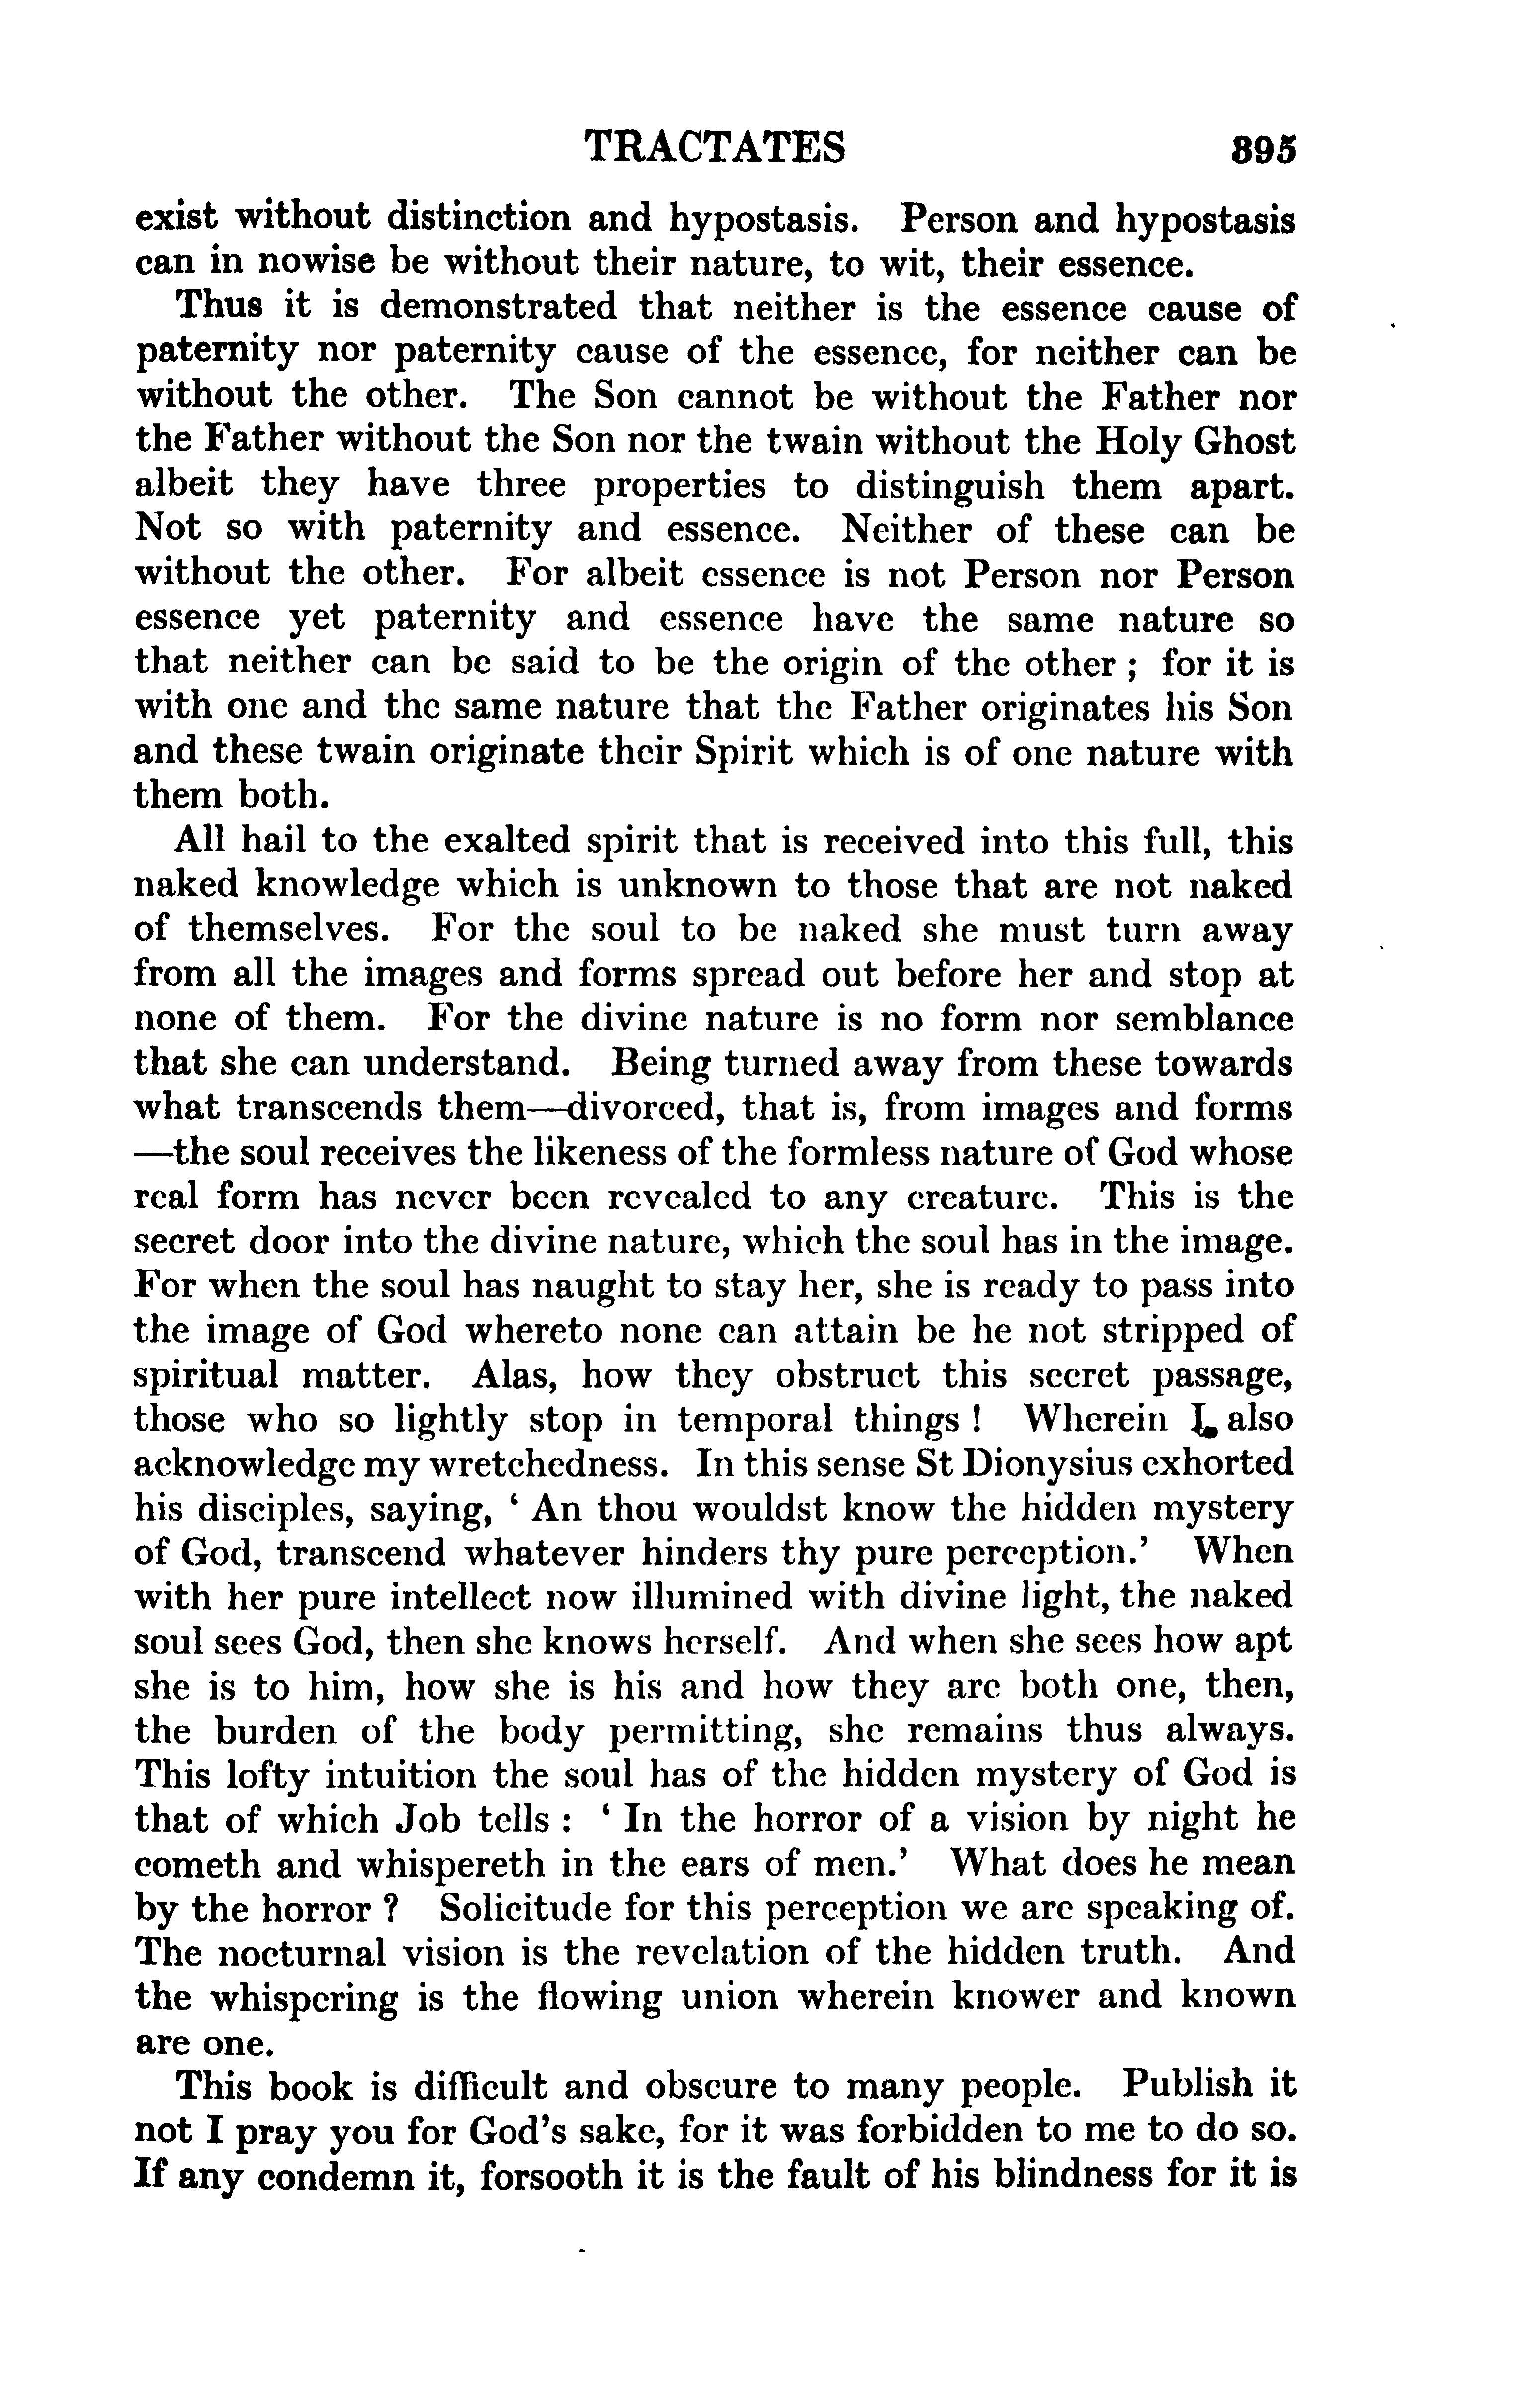 Image of page 0419